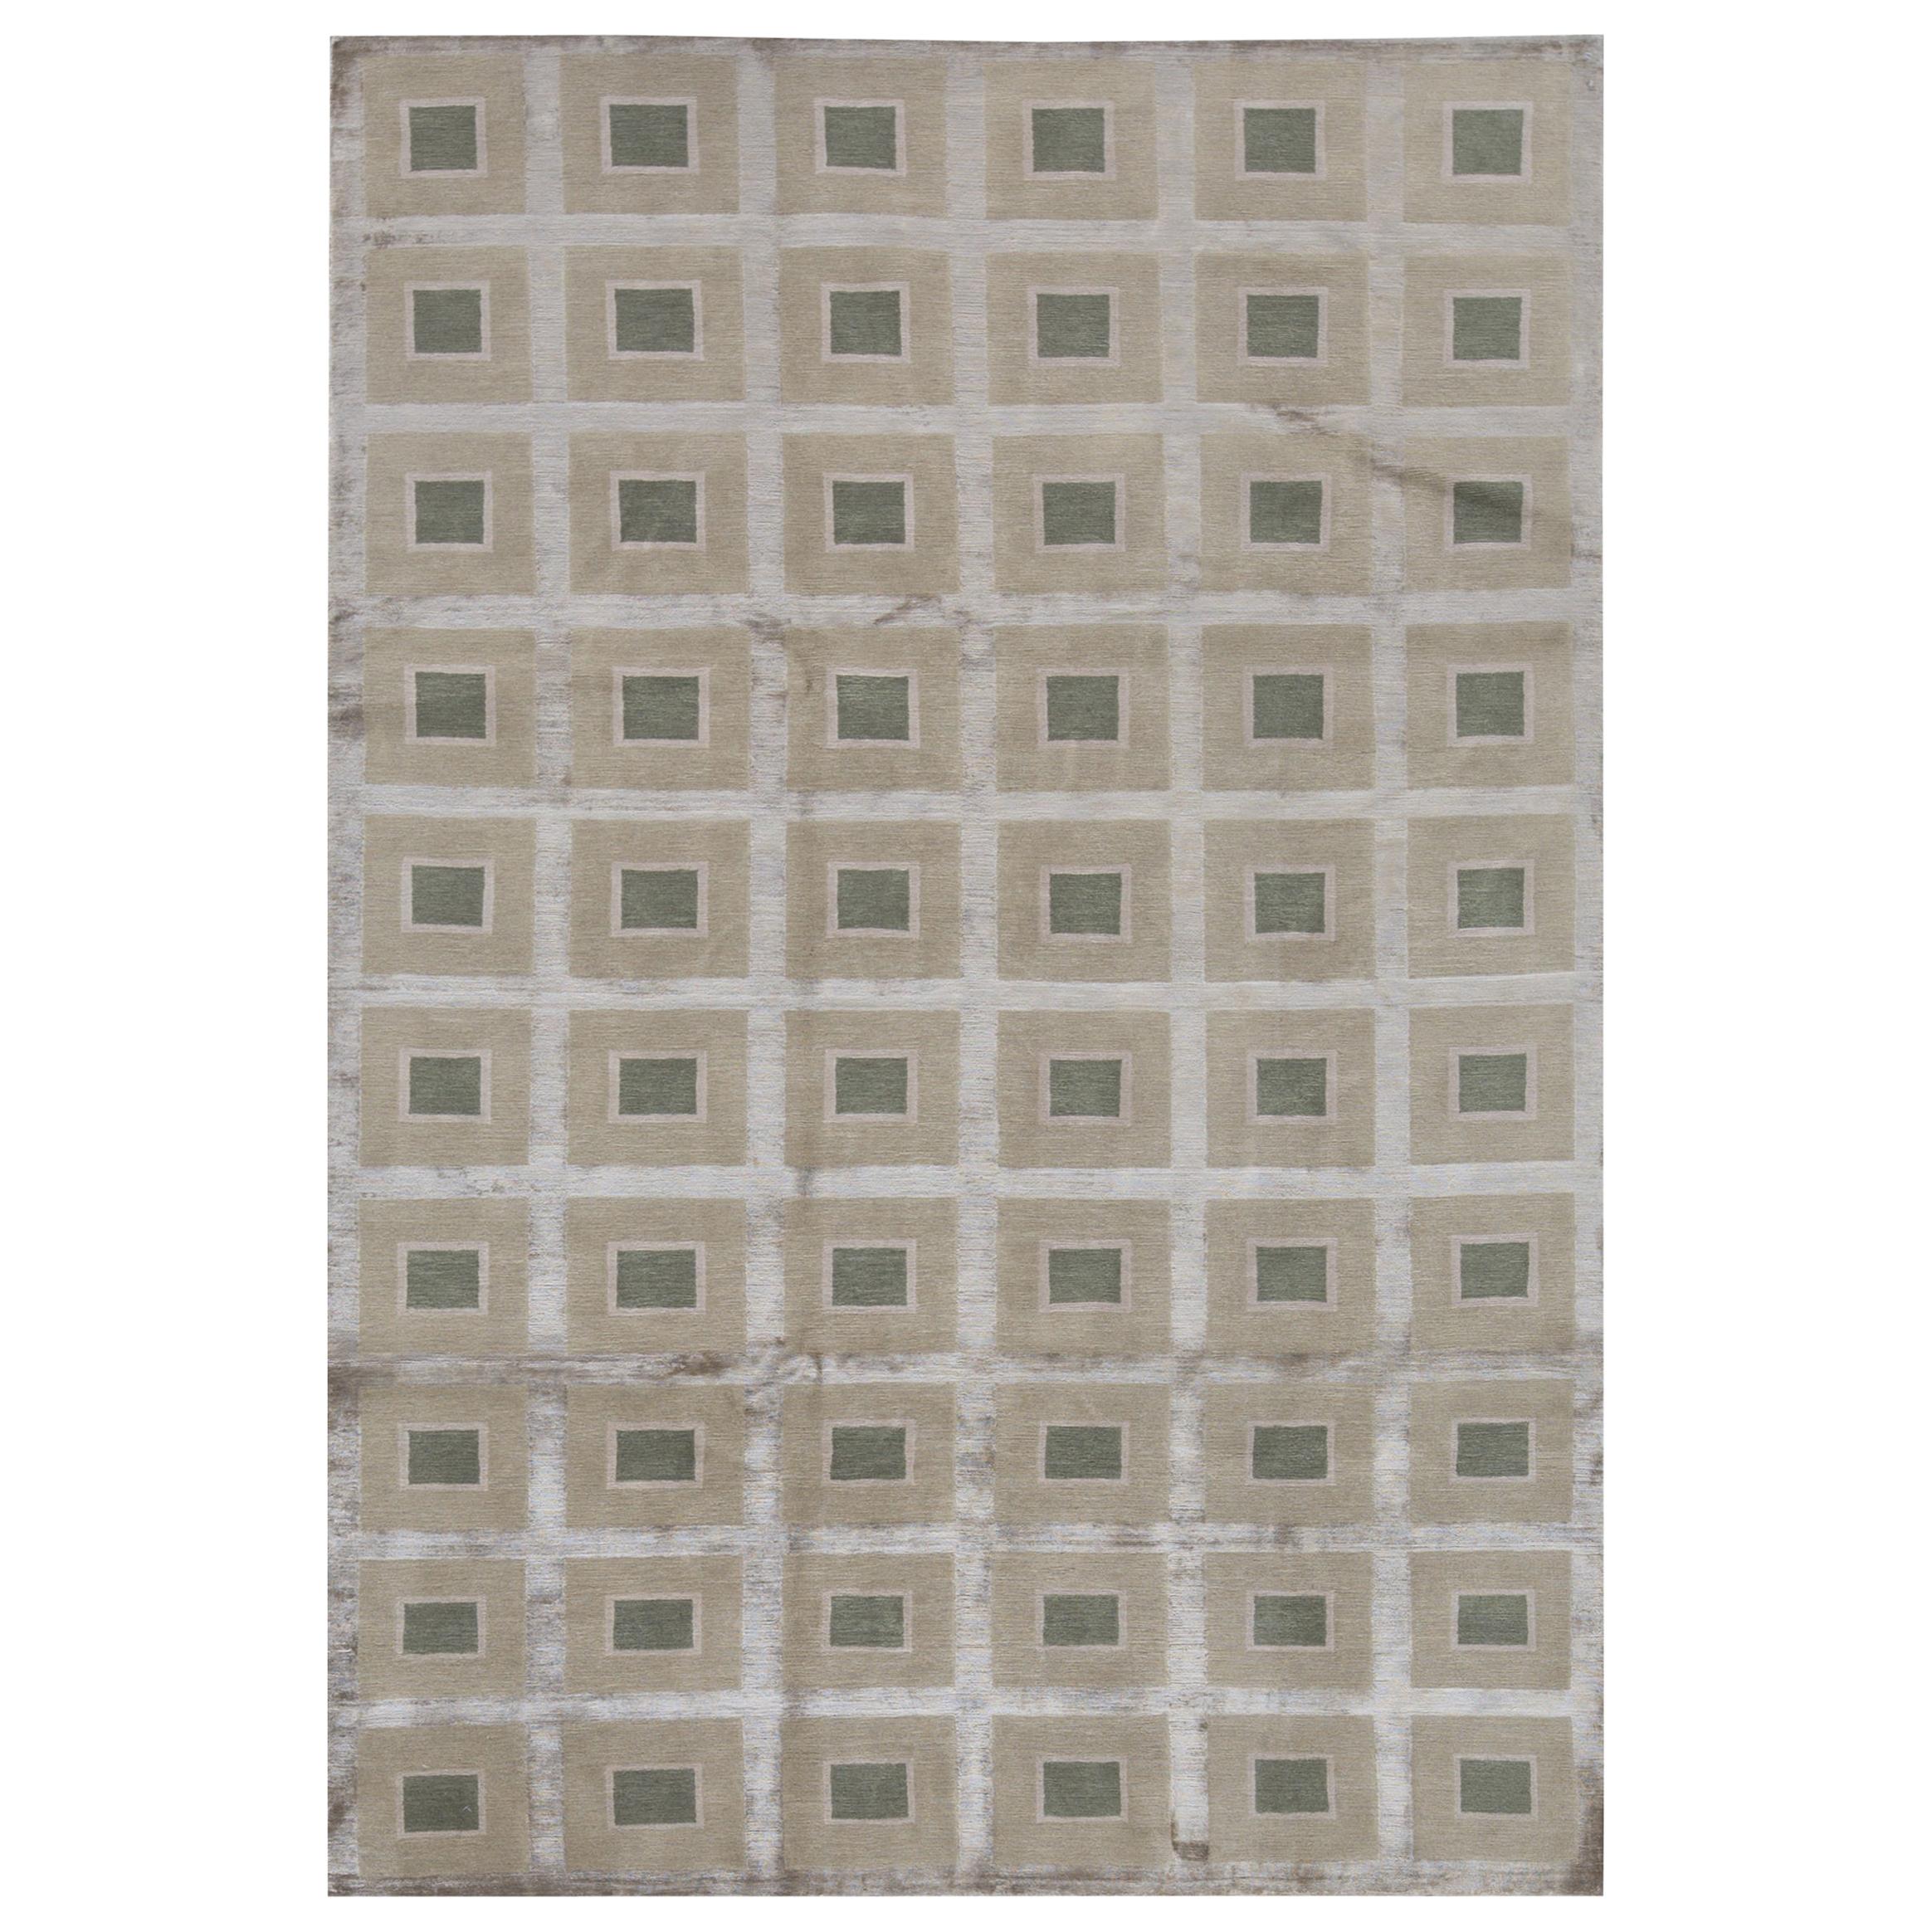 One of a Kind Contemporary Handwoven Wool Area Rug 6' x 9'